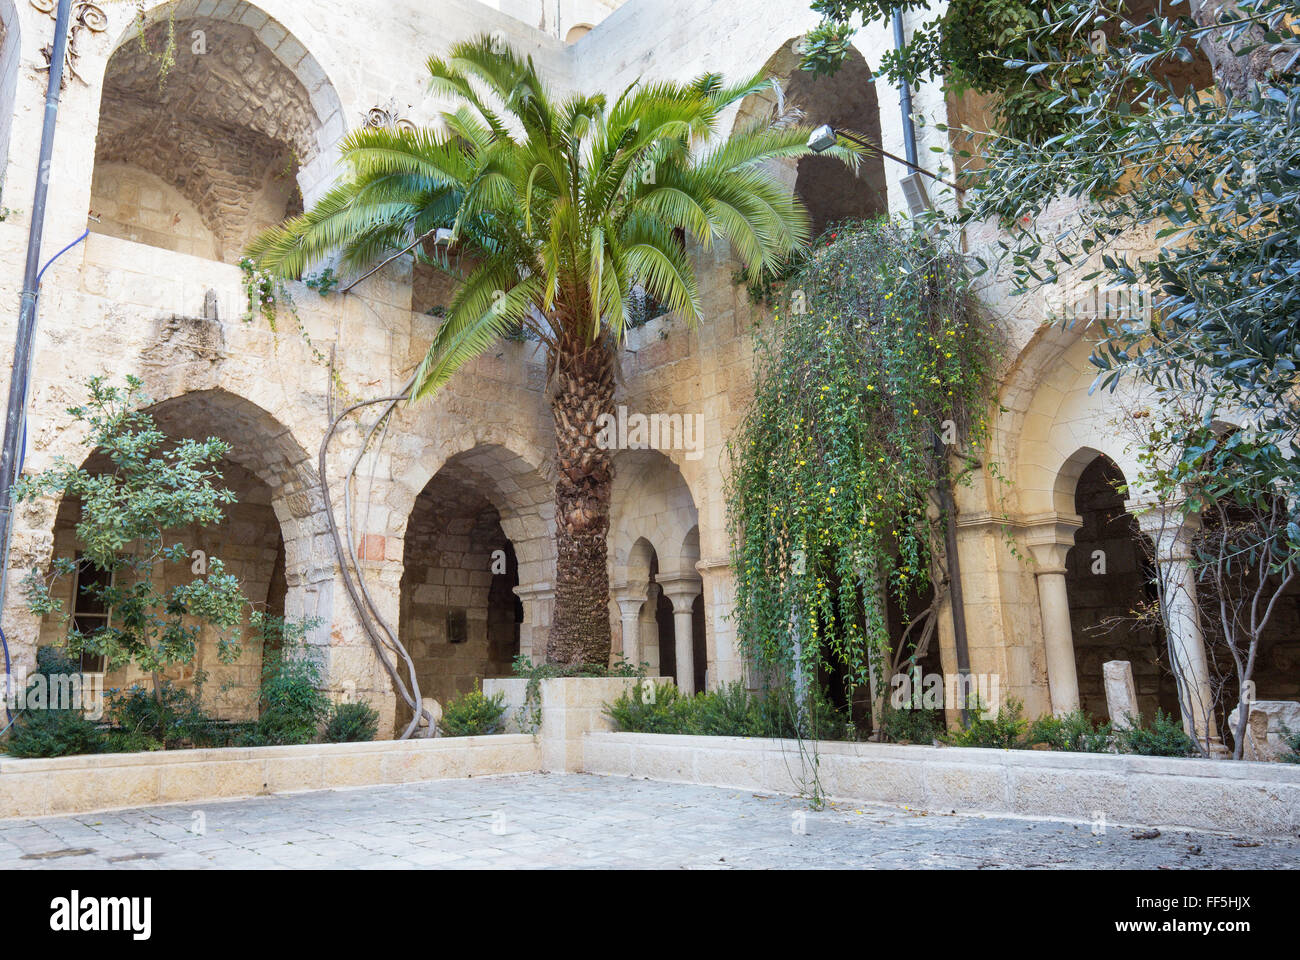 JERUSALEM, ISRAEL - MARCH 5, 2015: The atrium of The Church of the Redeemer. Stock Photo